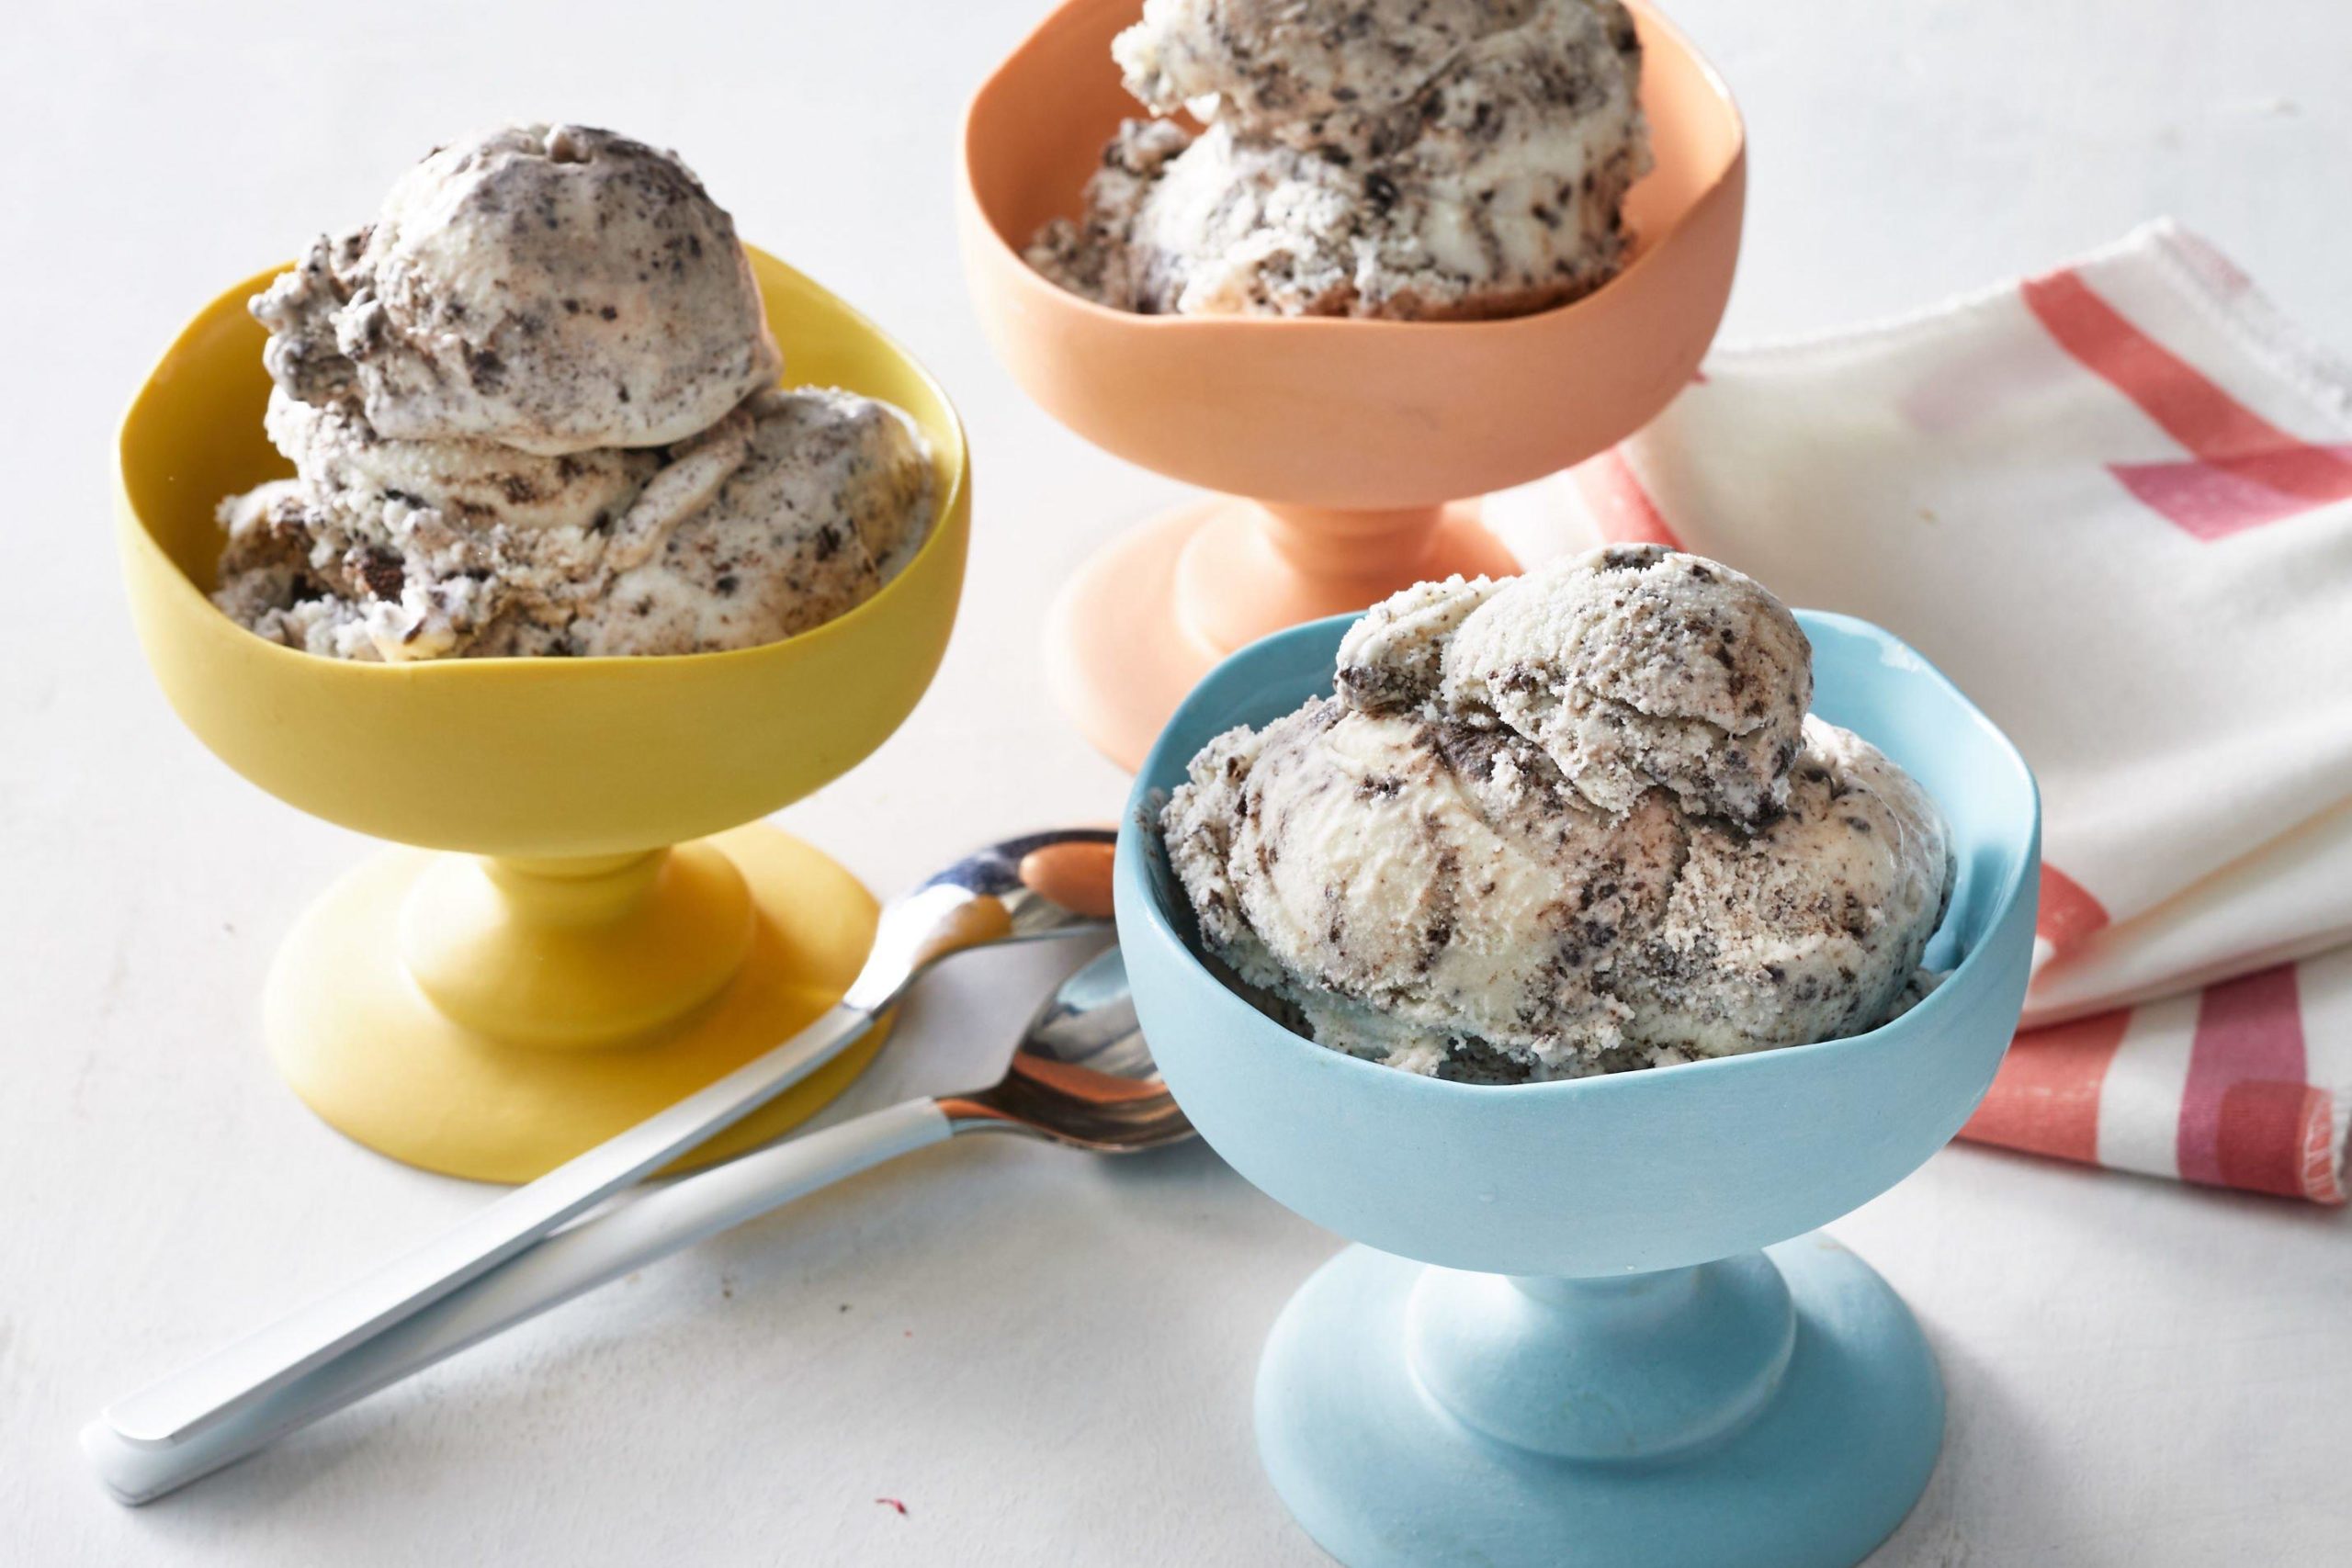 There Are Good Recipes for Homemade Ice Cream That Are Easy to Make